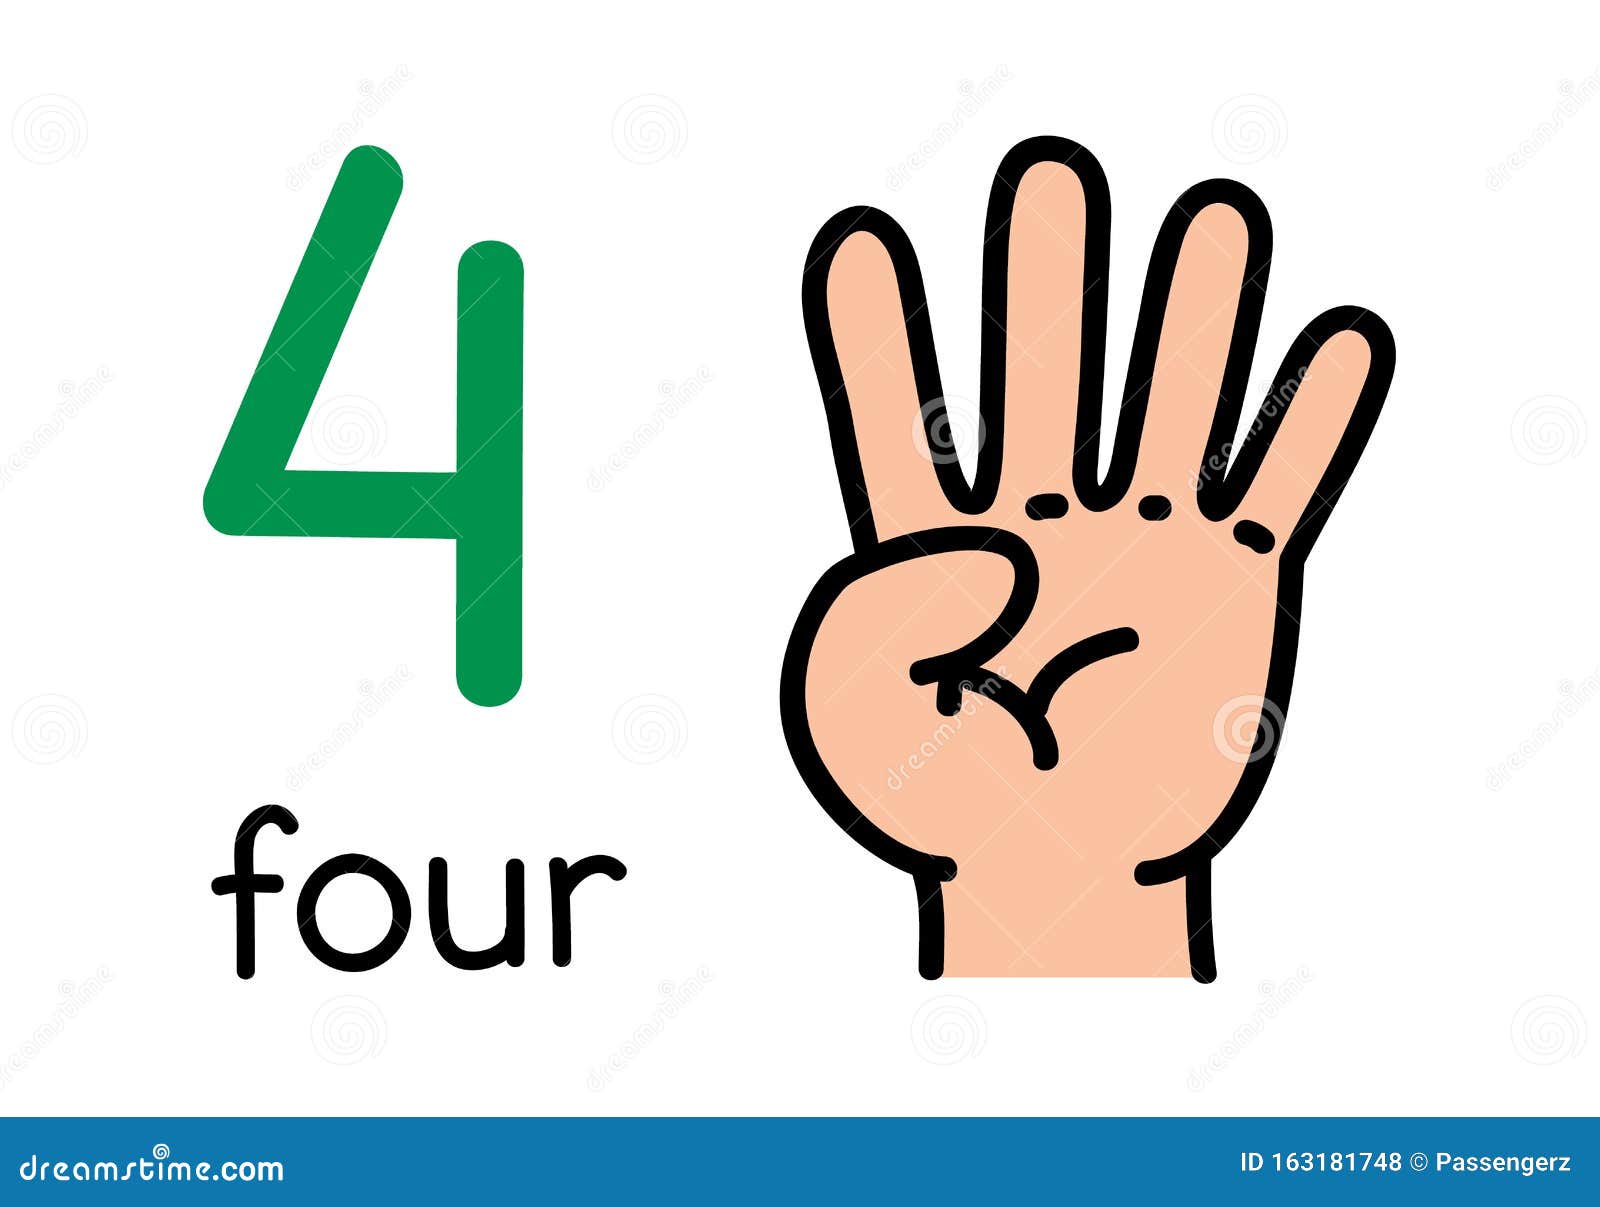 4, kid`s hand showing the number four hand sign.